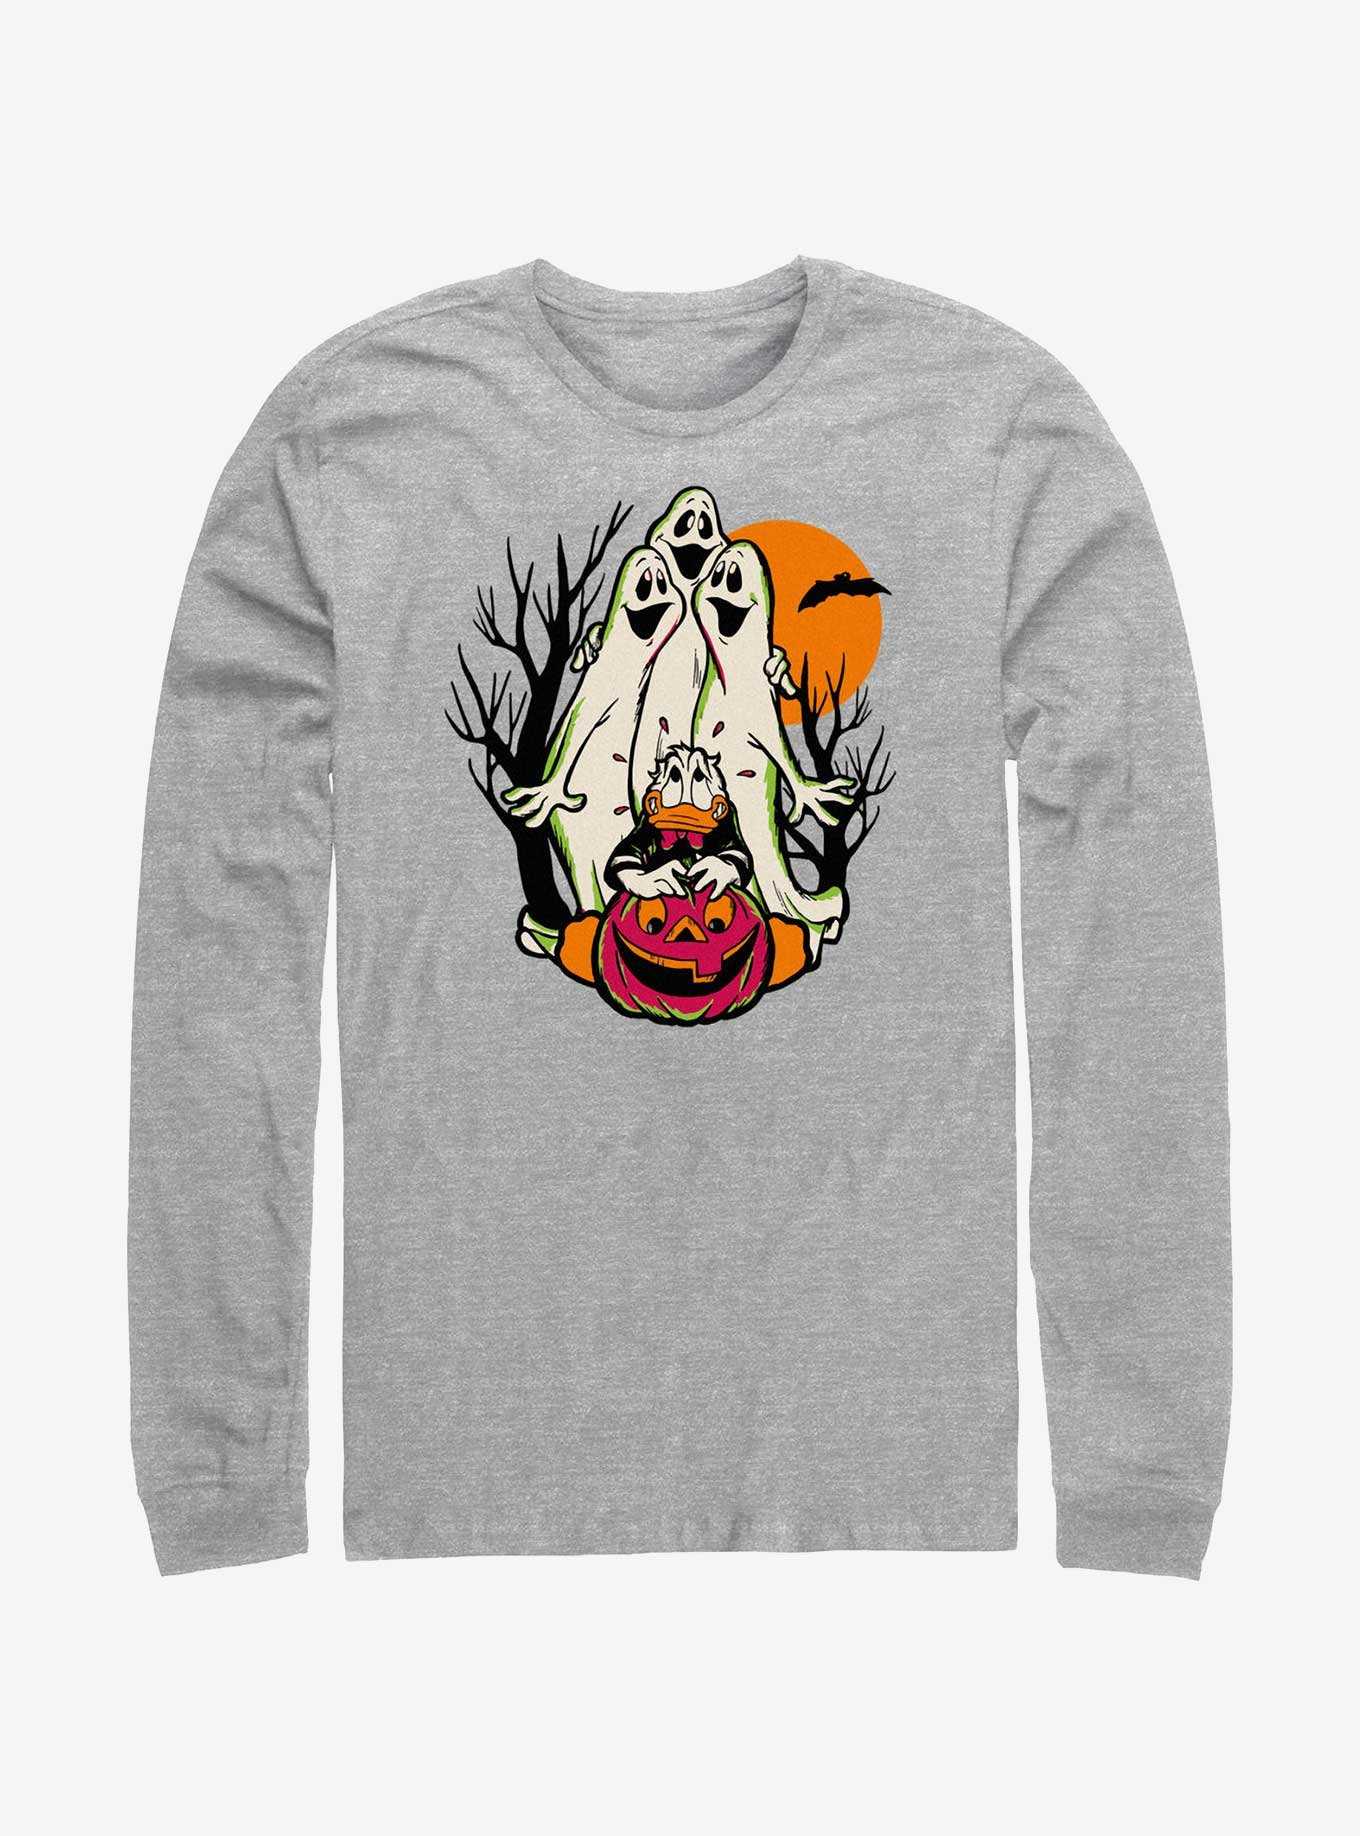 Disney100 Halloween Spooky Ghosts Scared Donald Long-Sleeve T-Shirt, , hi-res